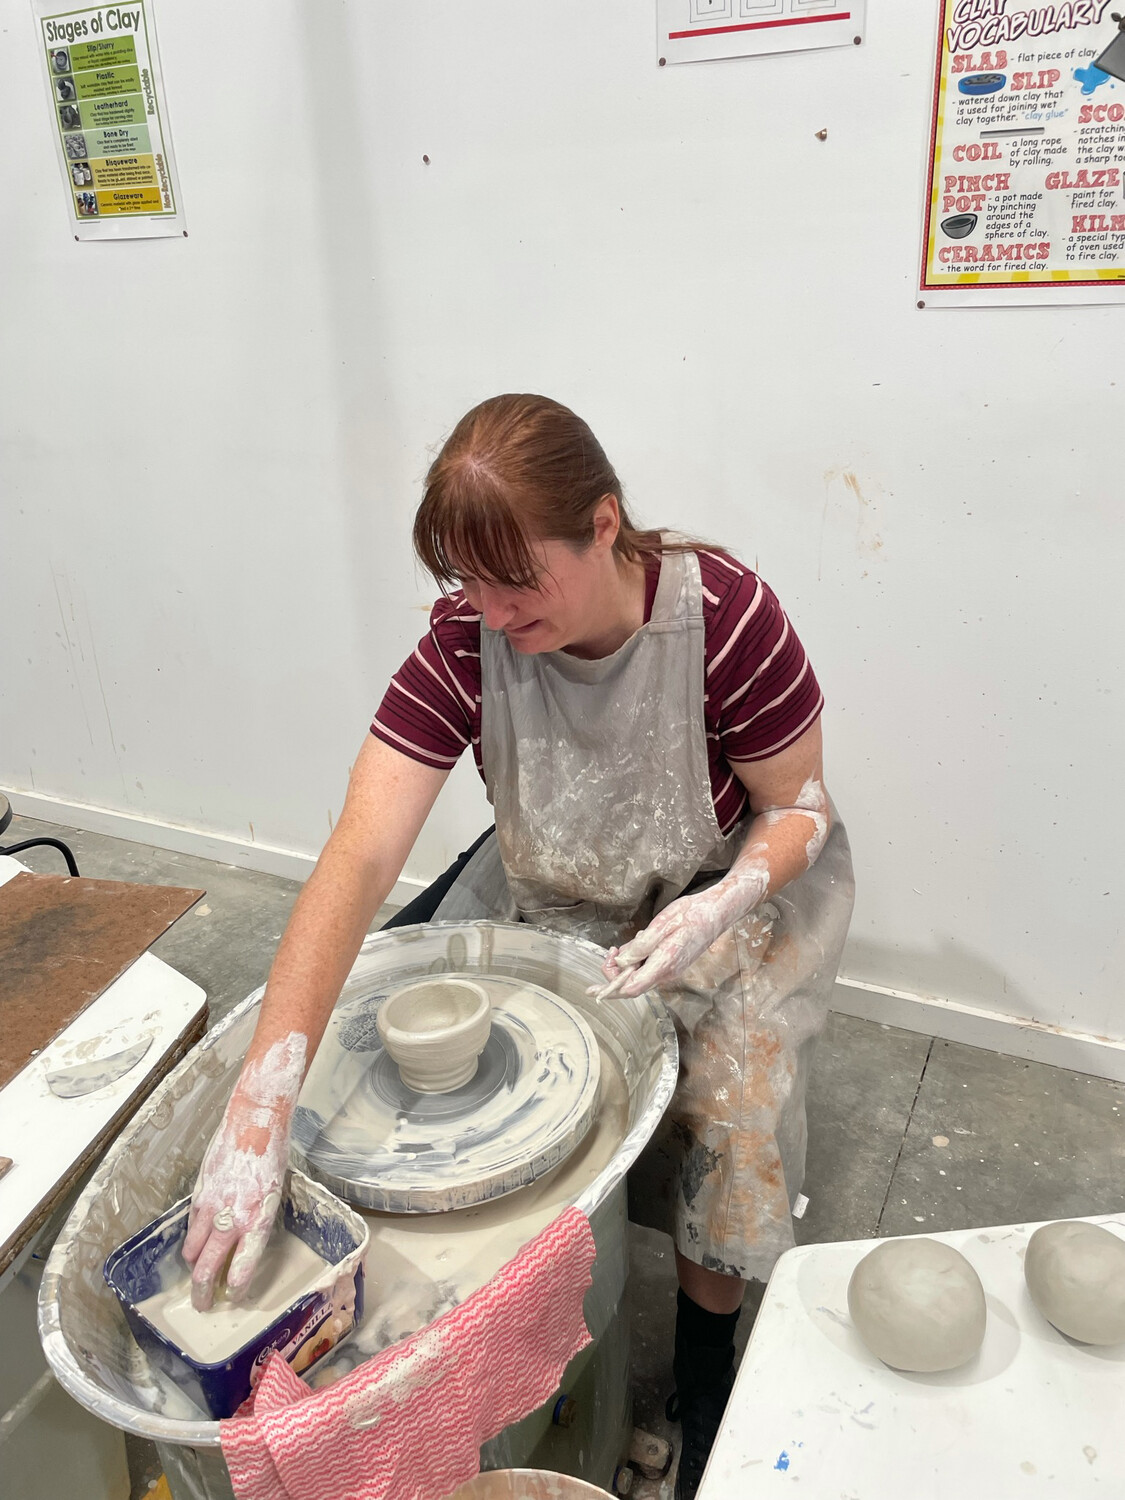 Slip, Spin & Sculpt! 4 week Pottery course Friday 6th May 12:30-2:30pm